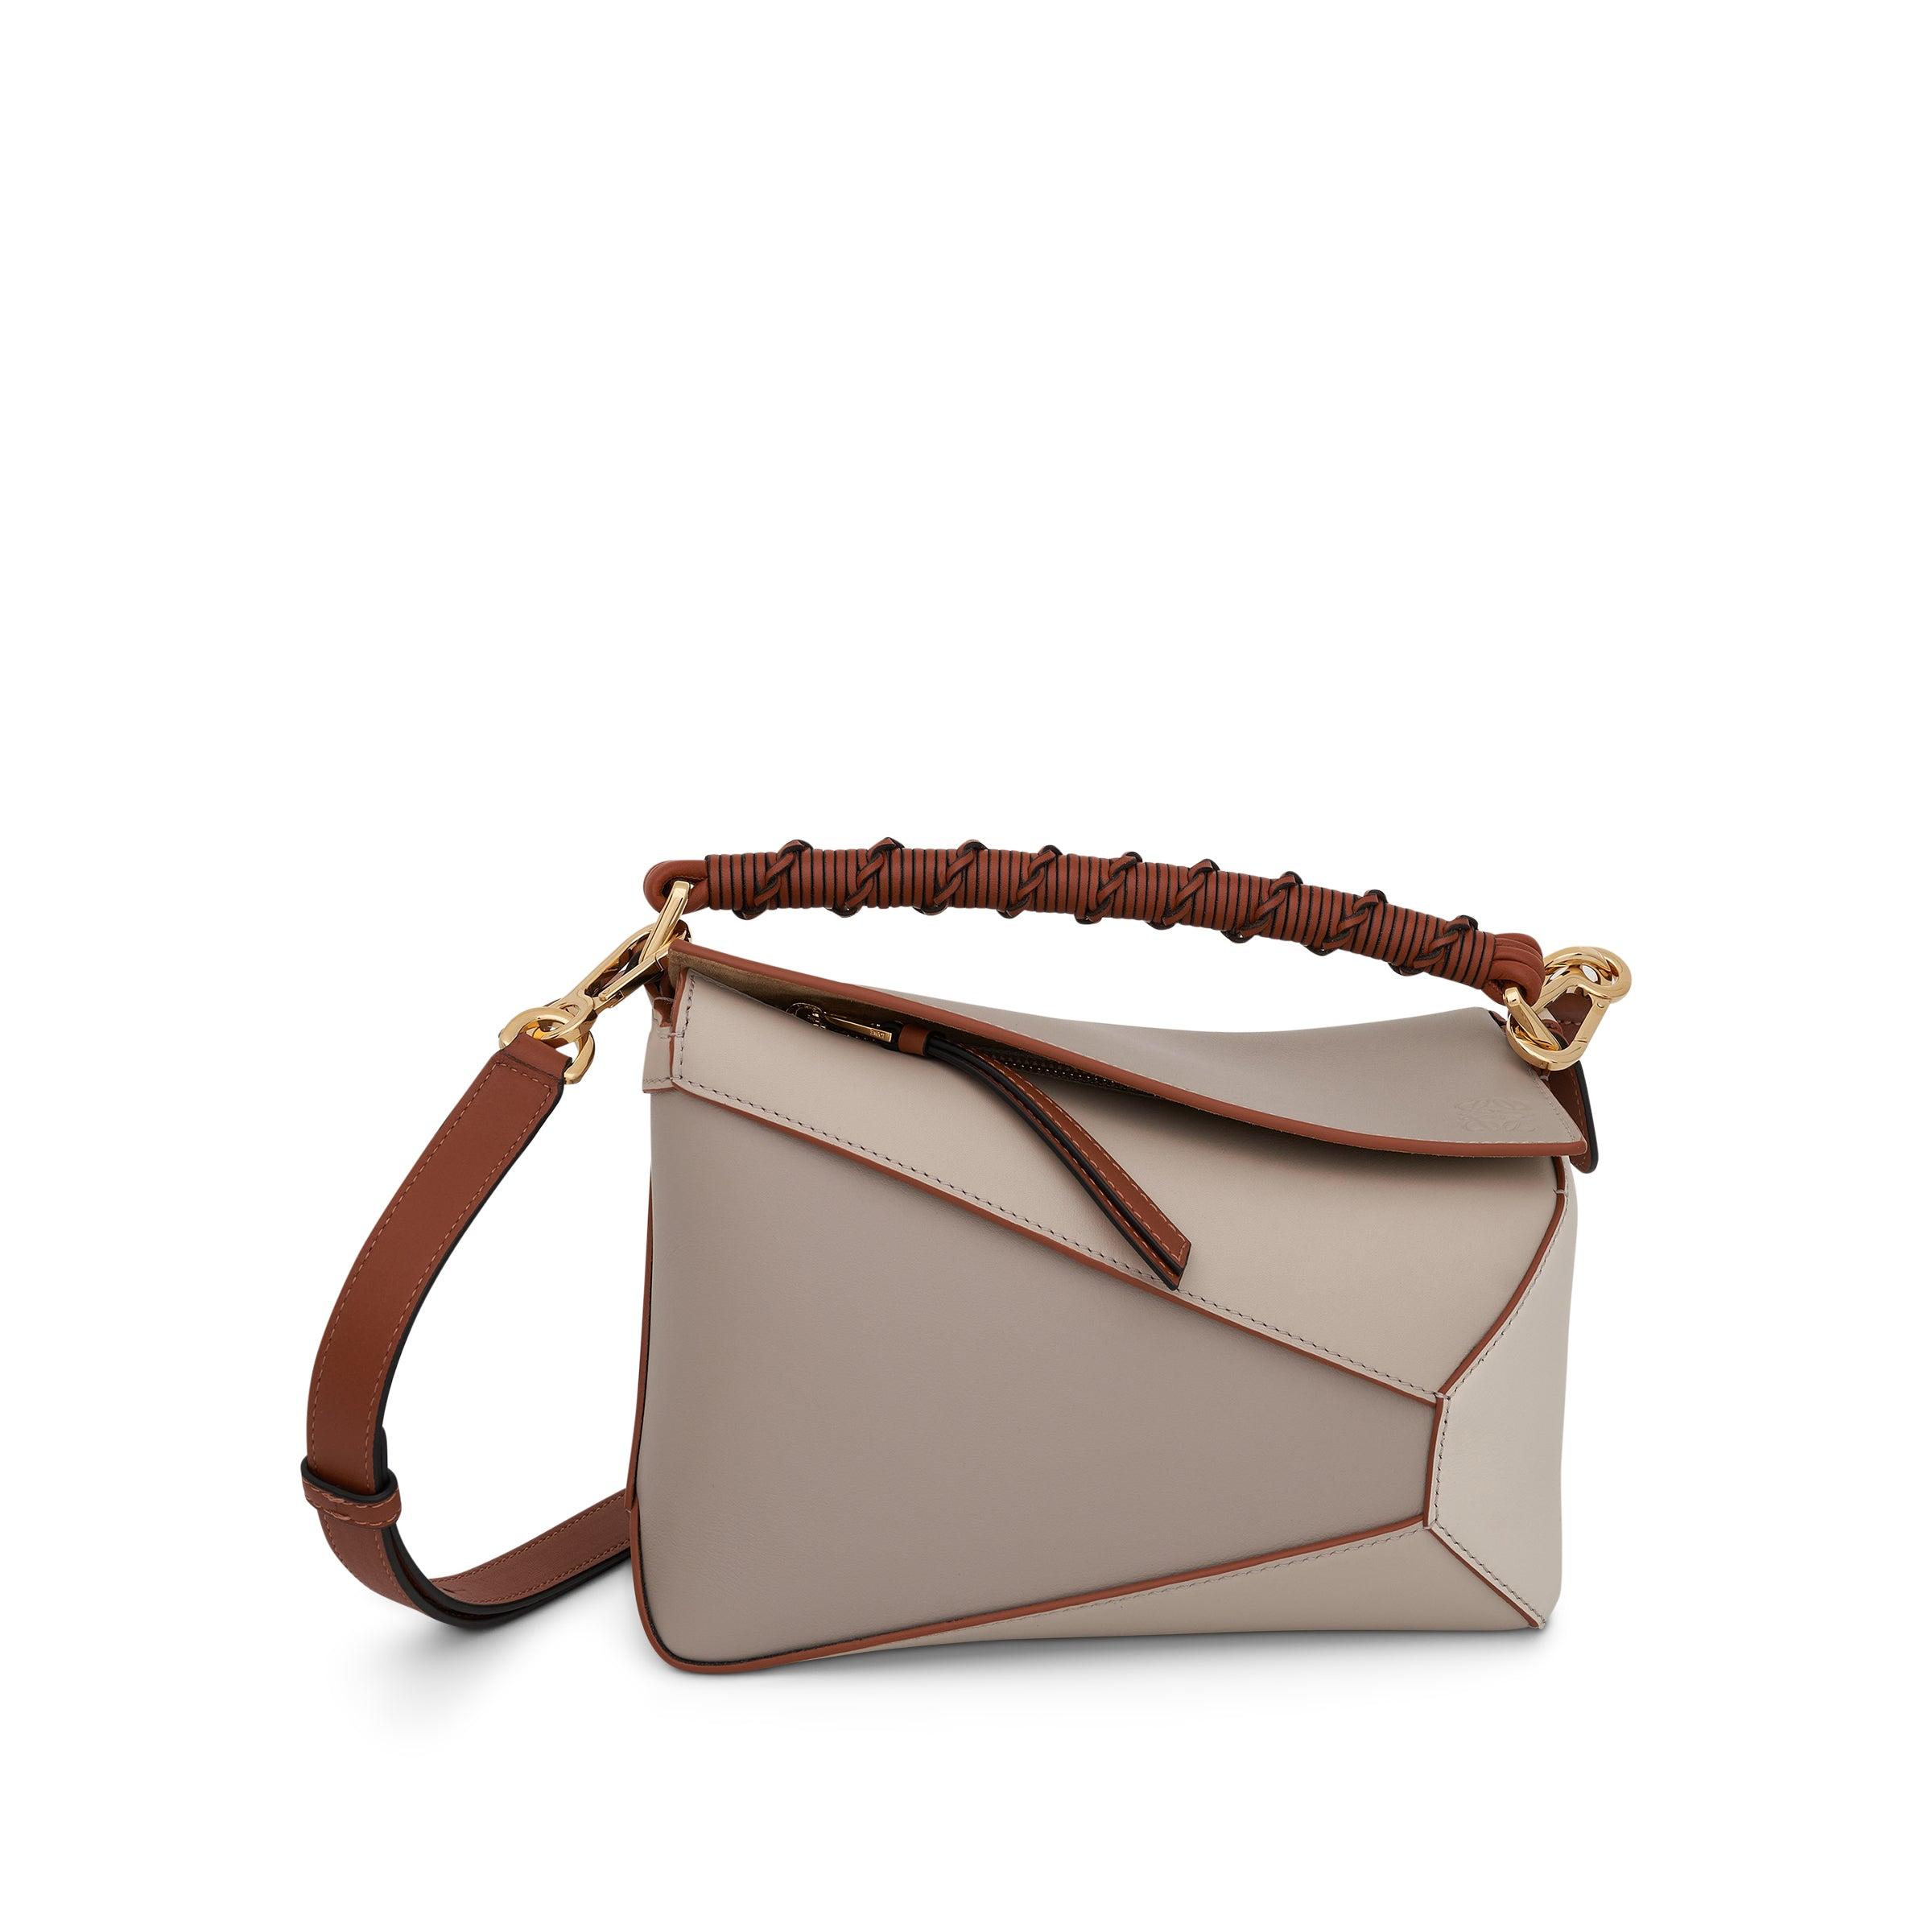 Loewe - Small Puzzle Edge Ghost & Soft White Shoulder Bag